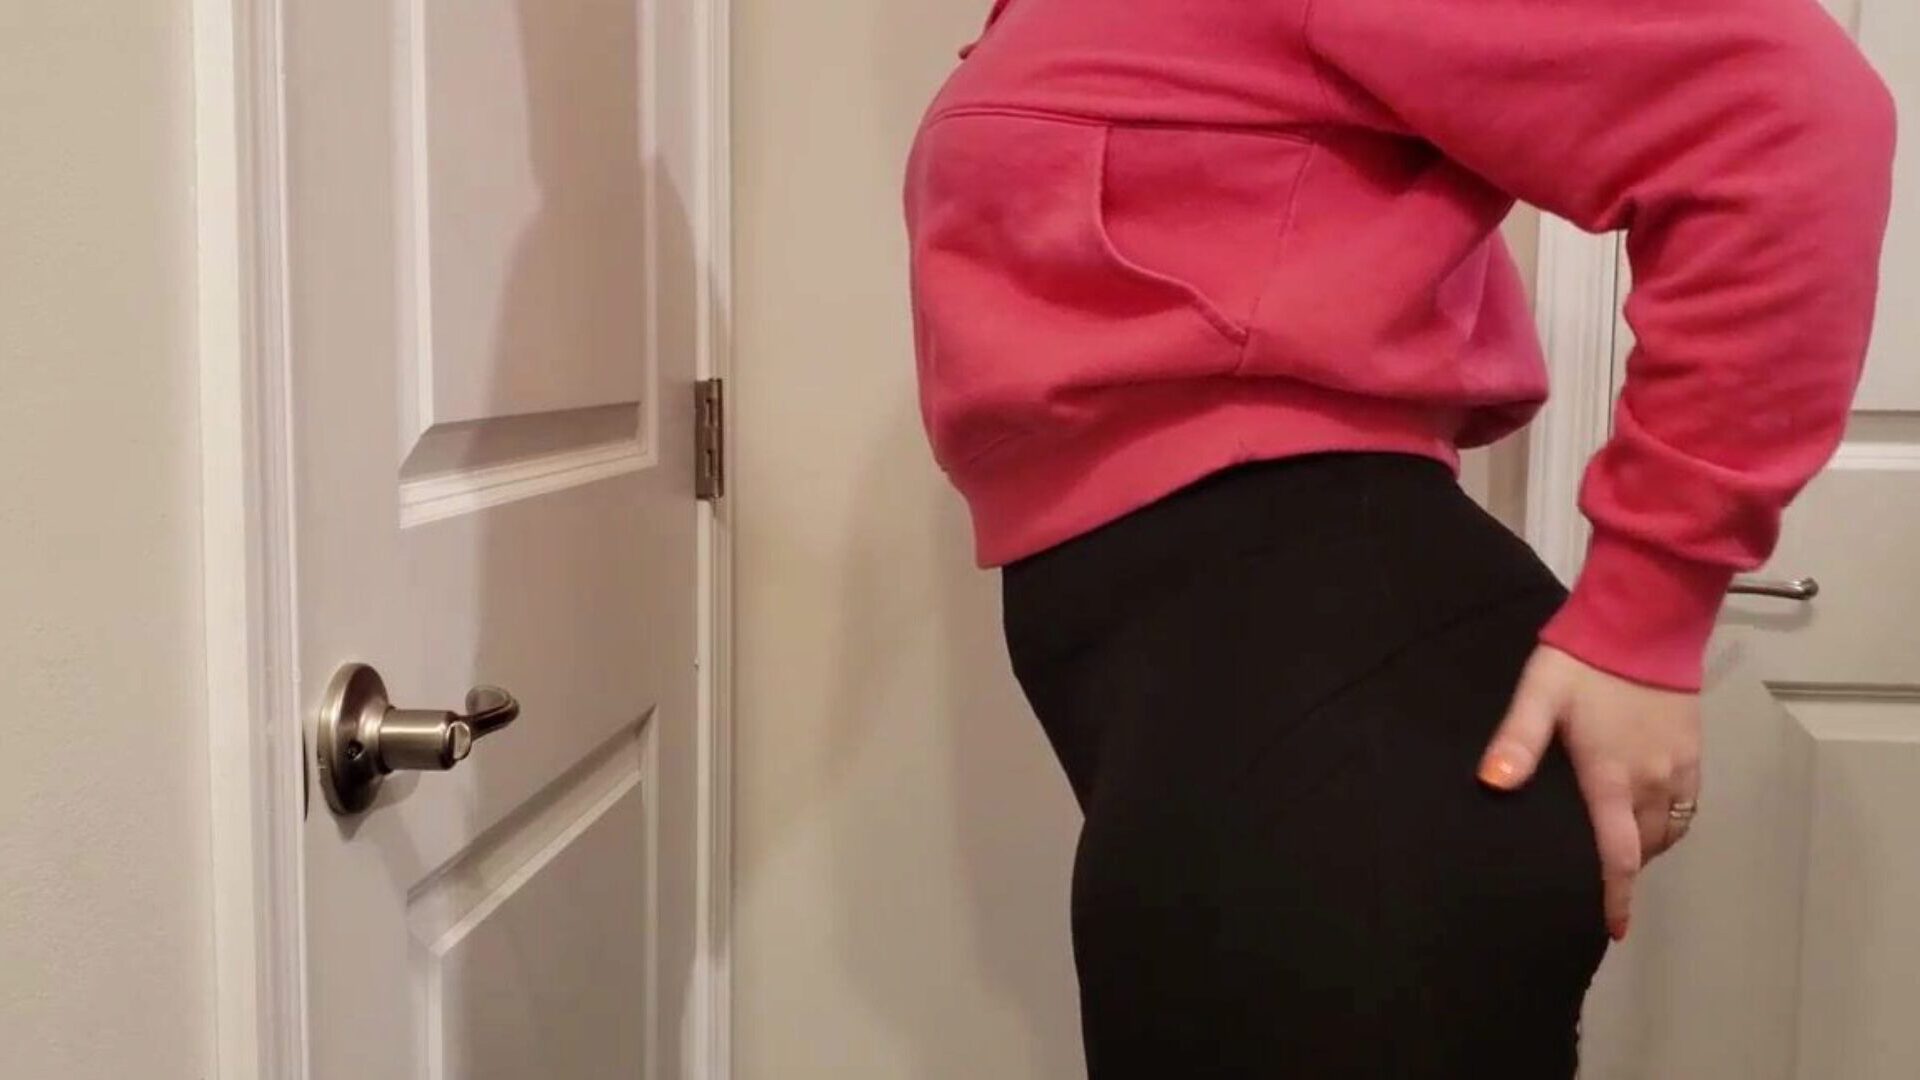 My Big Ass In Yoga Pants and Some New Lingerie